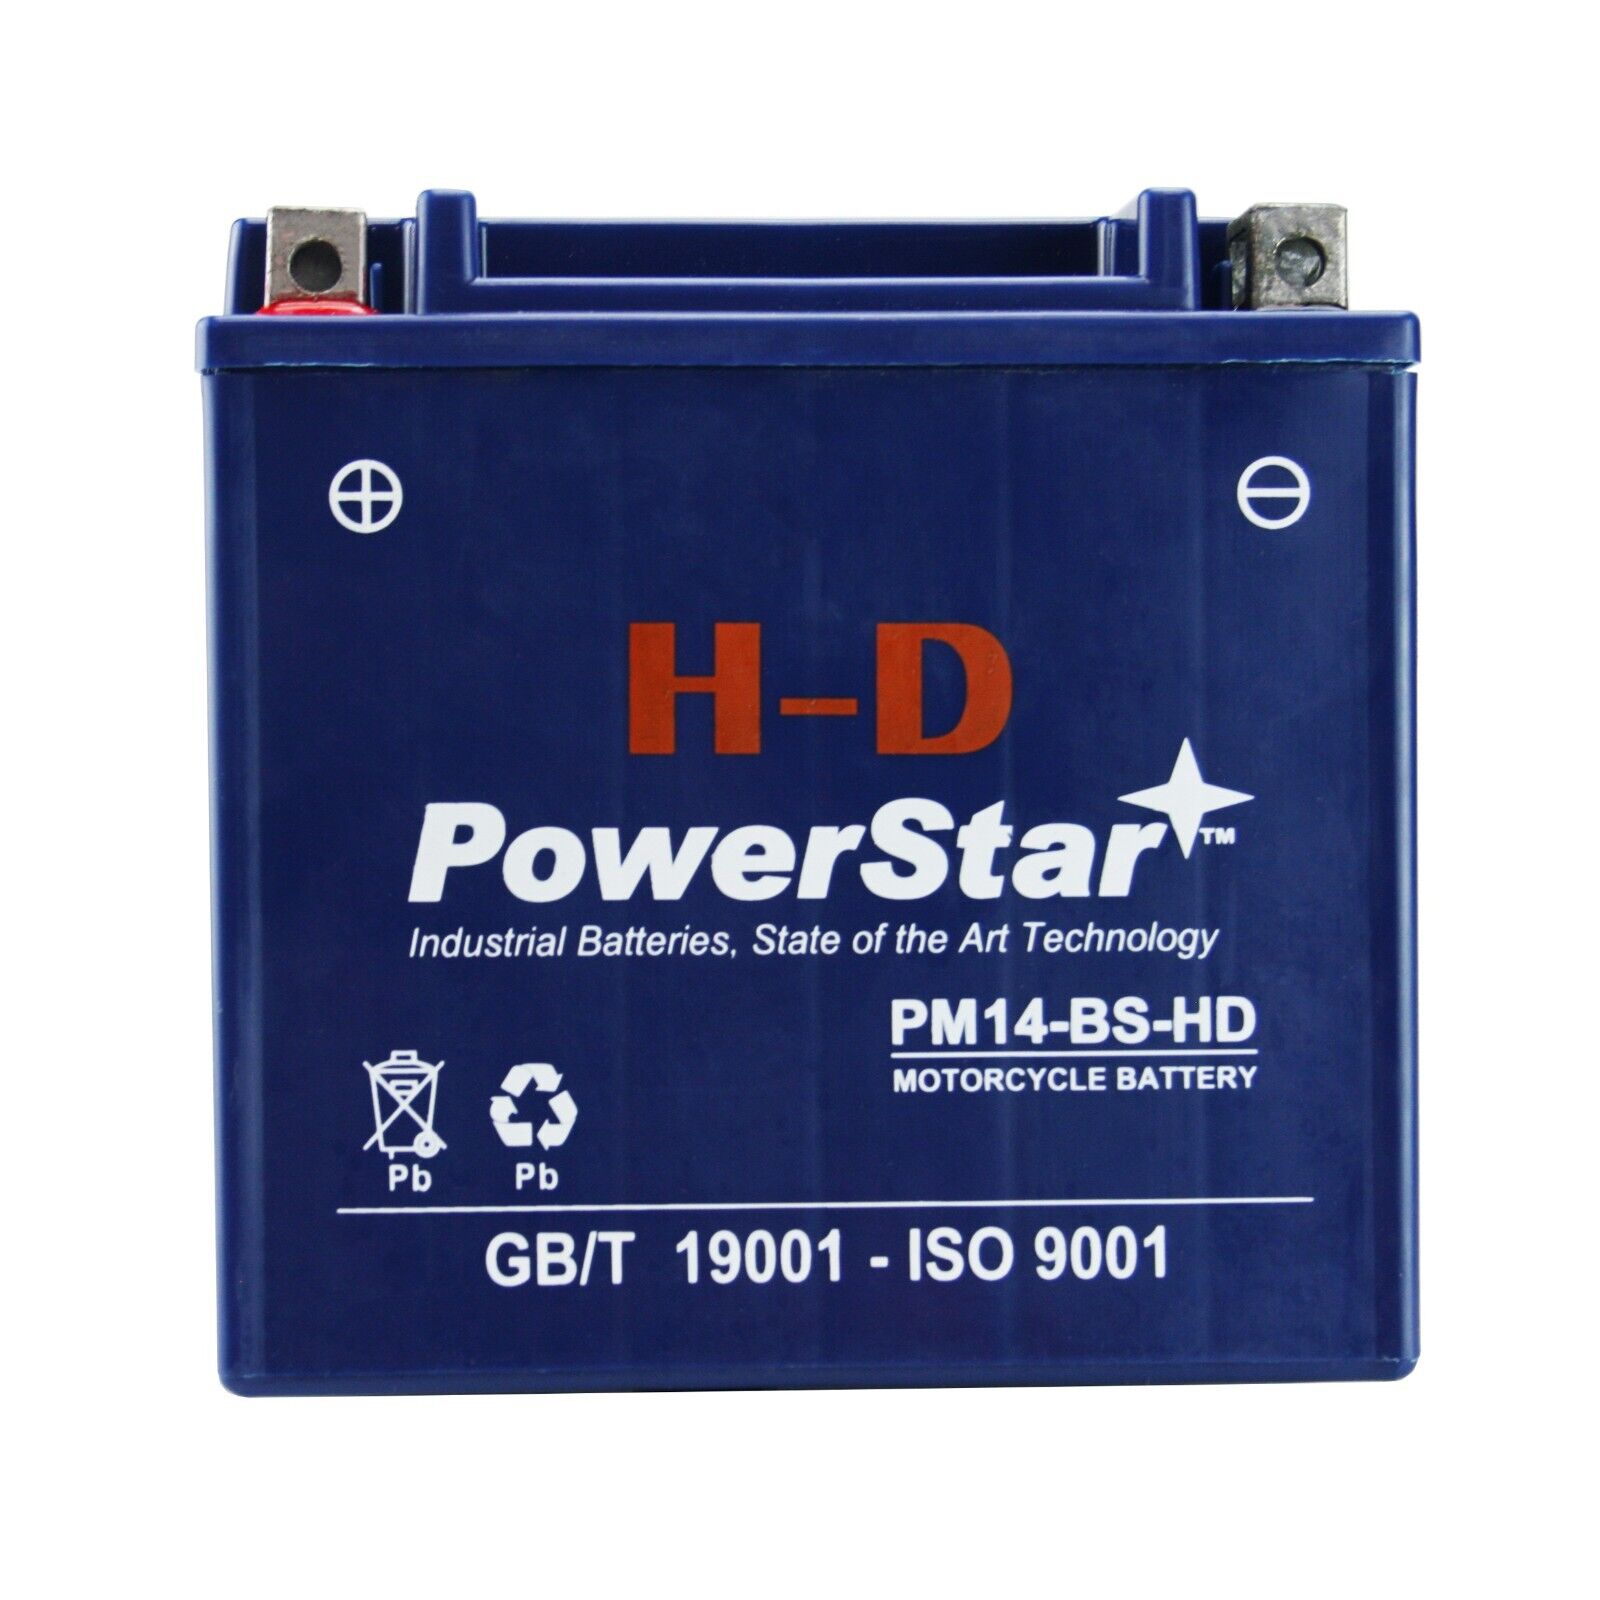 PowerStar H-D YTX14-BS Battery For BMW R1200GS (From 06/2013) 2013-2013